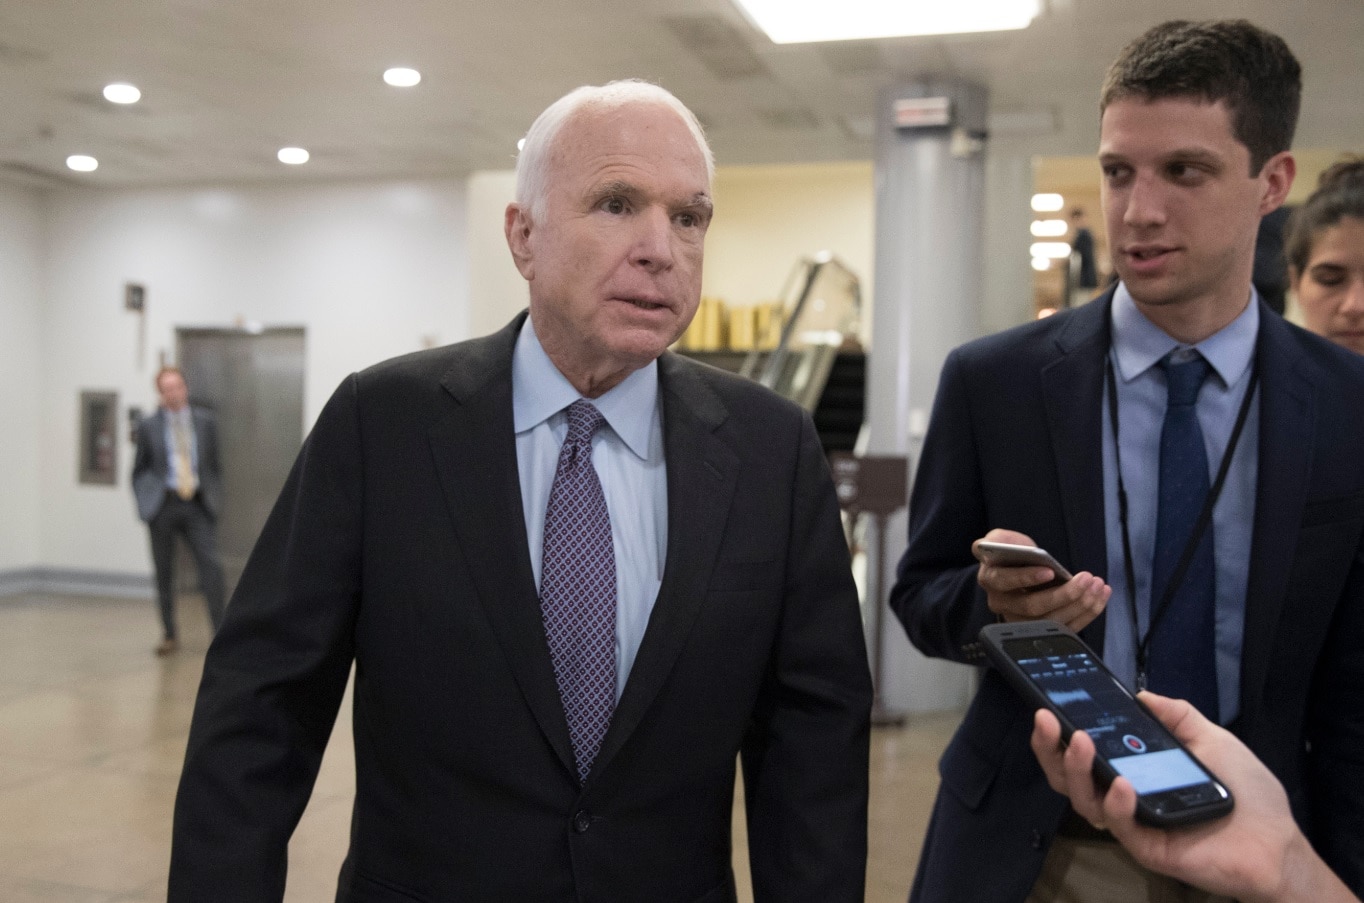 Republican Senator from Arizona John McCain (L) is followed by members of the news media duirng Republican attempts to repeal Obamacare